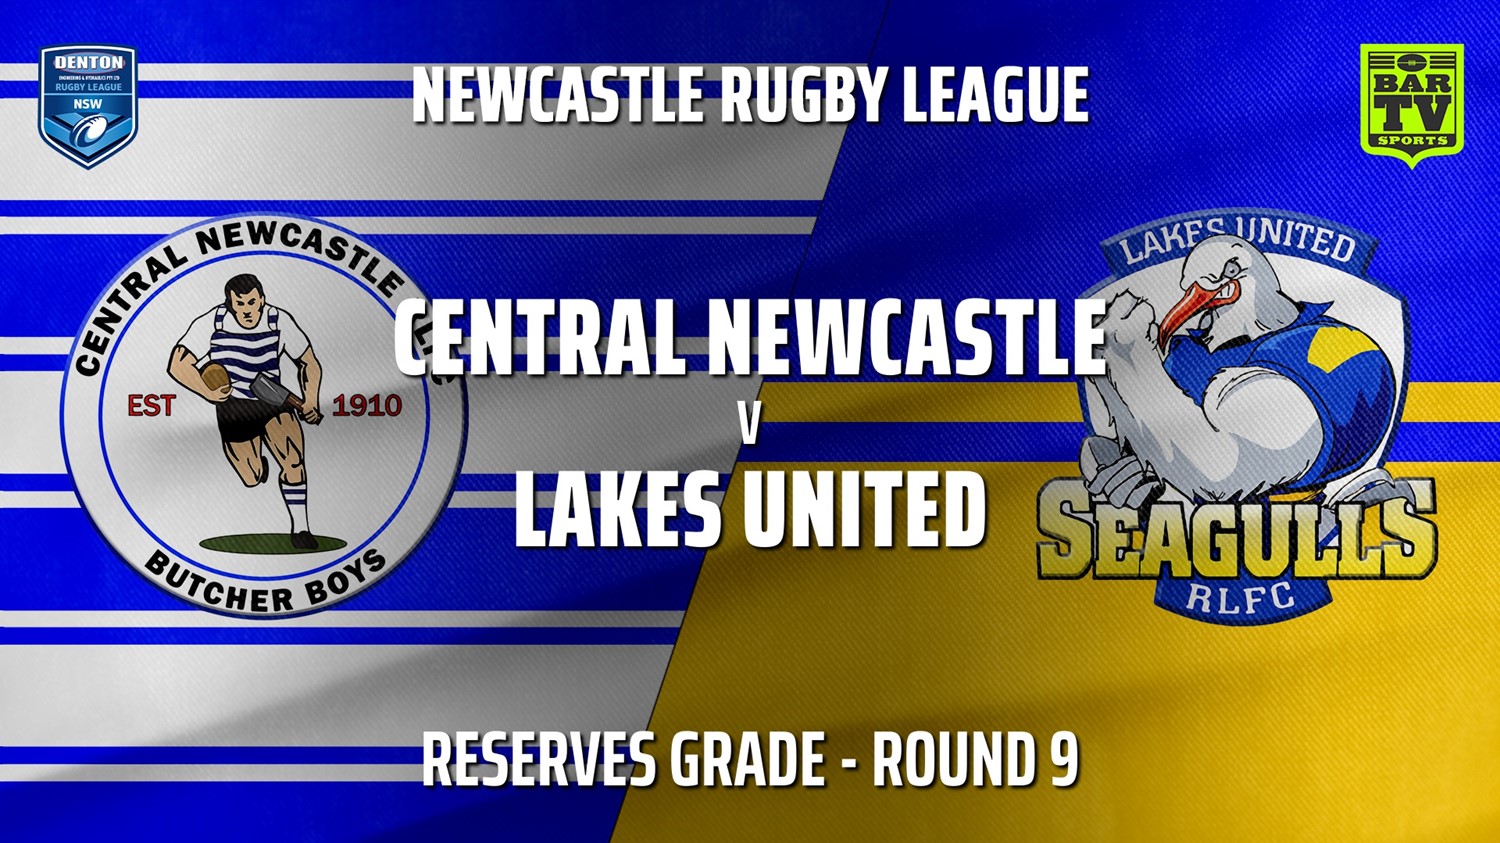 210523-Newcastle Rugby League Round 9 - Reserves Grade - Central Newcastle v Lakes United Slate Image